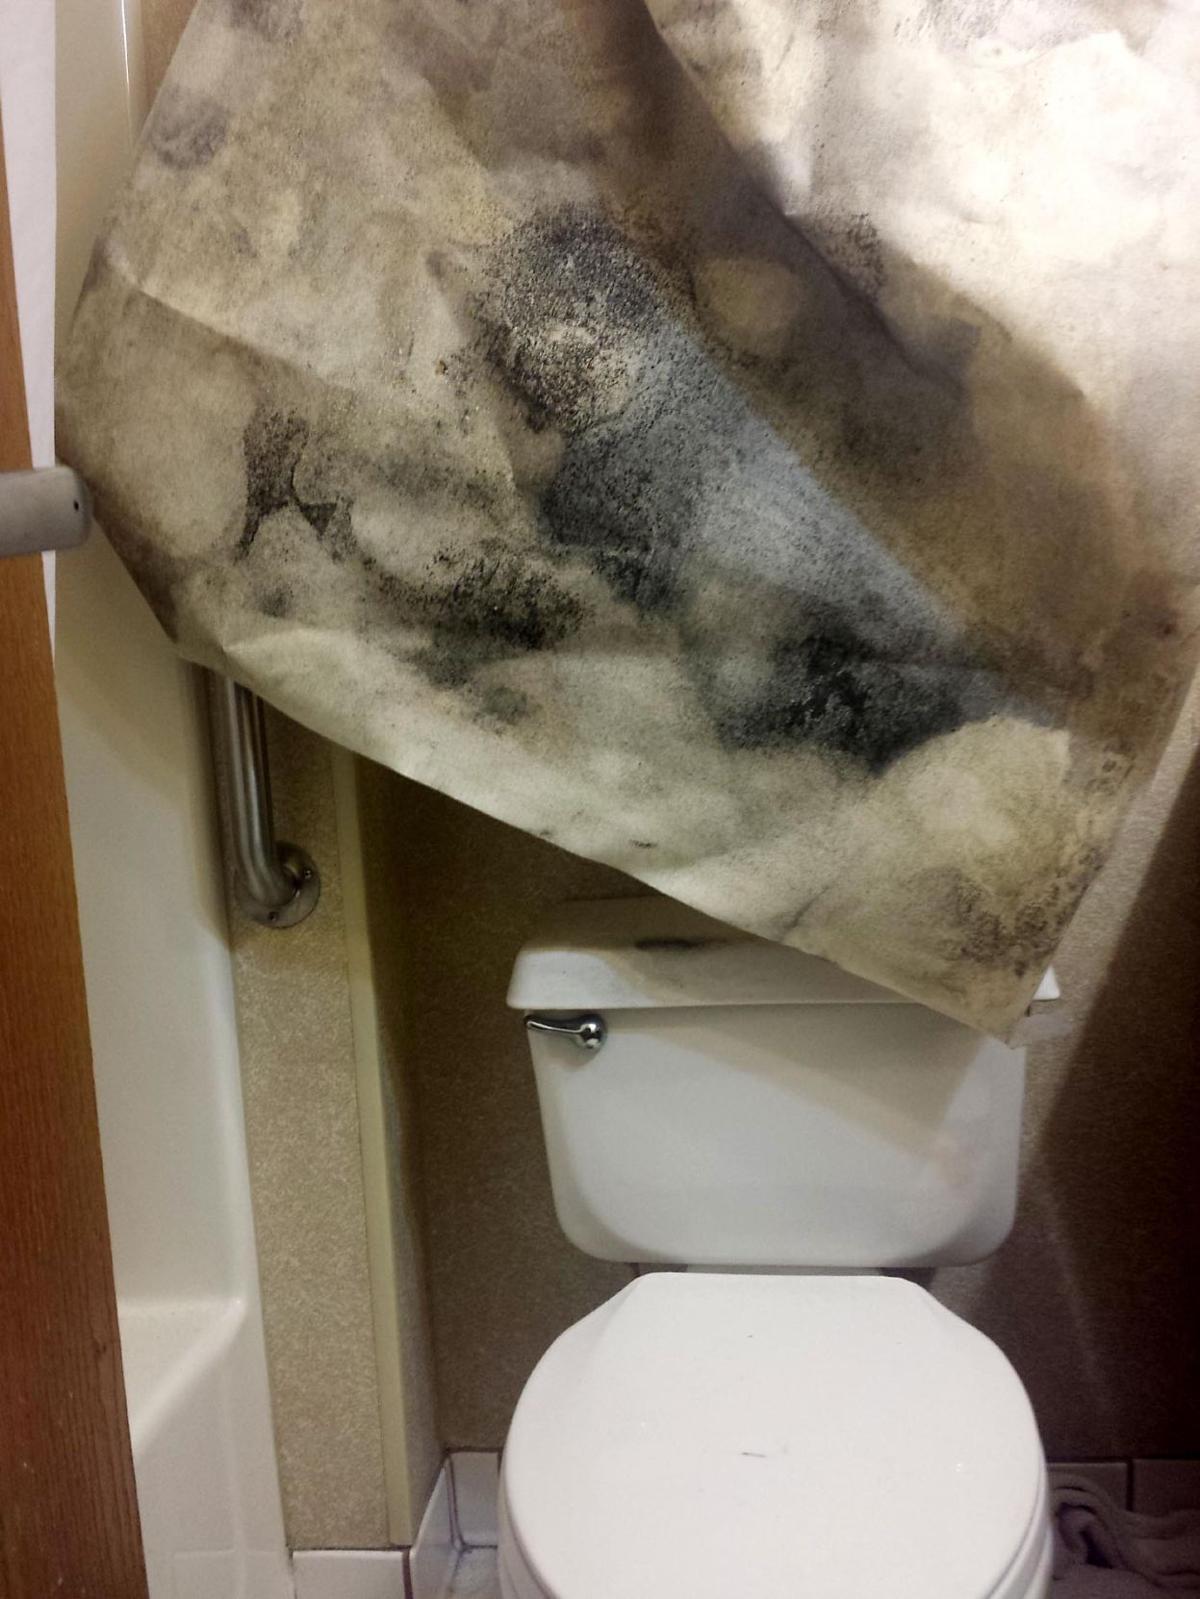 health department deal with hotel mold